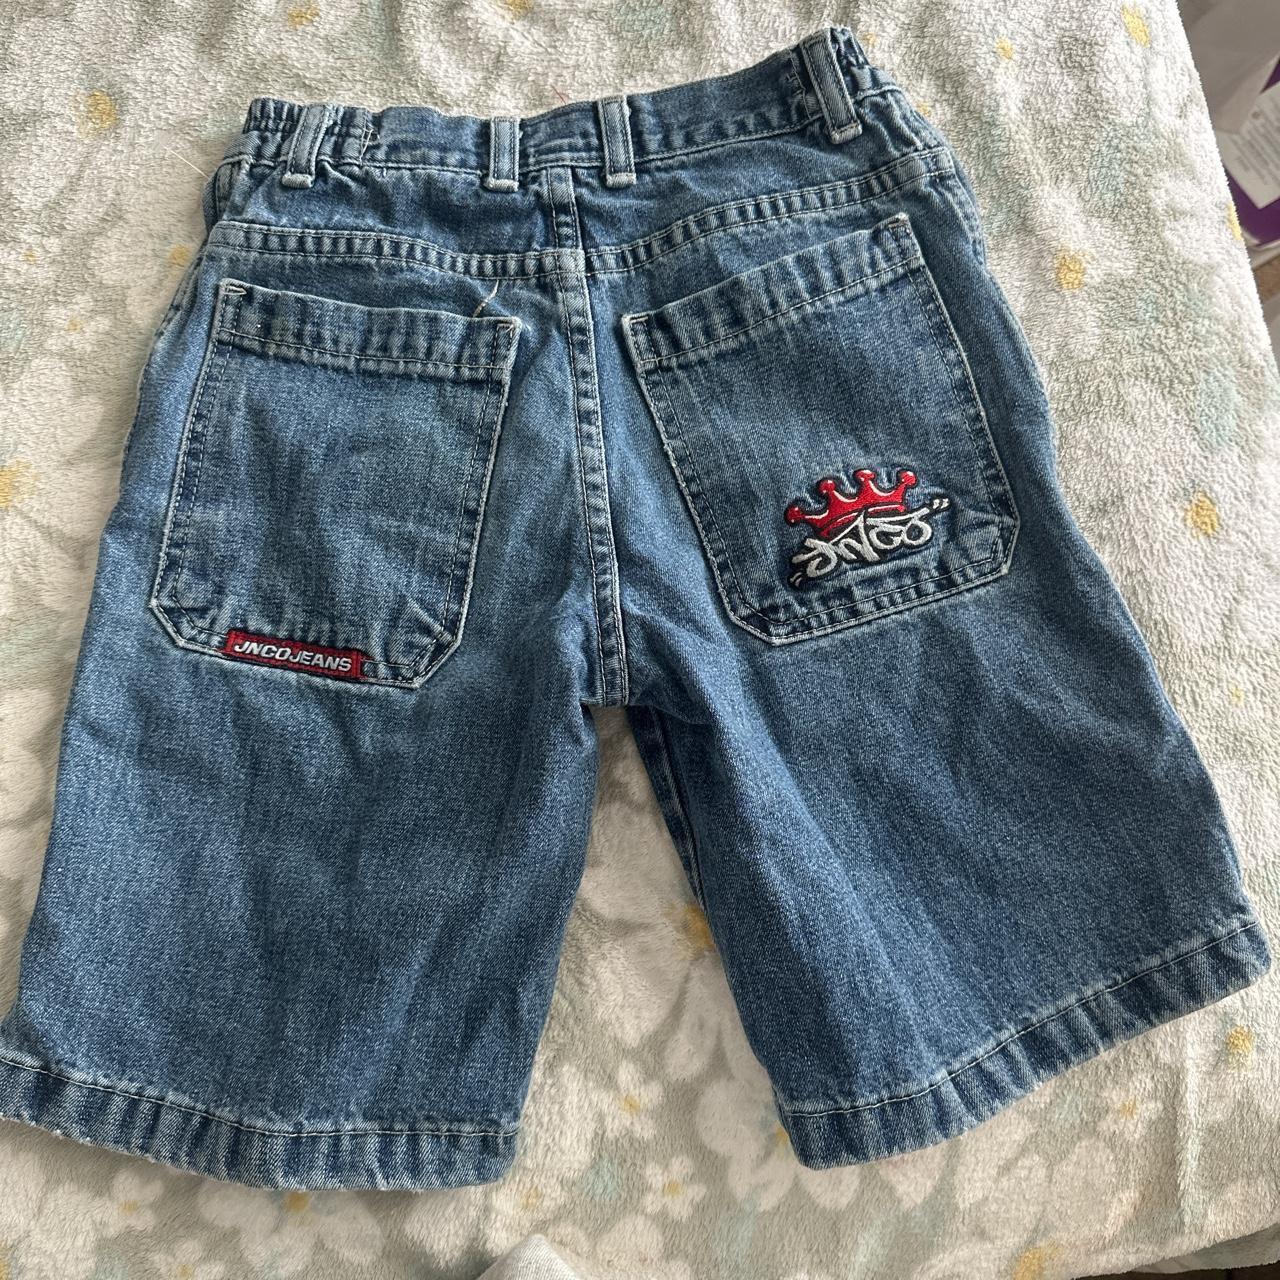 JNCO Blue and Red Shorts | Depop